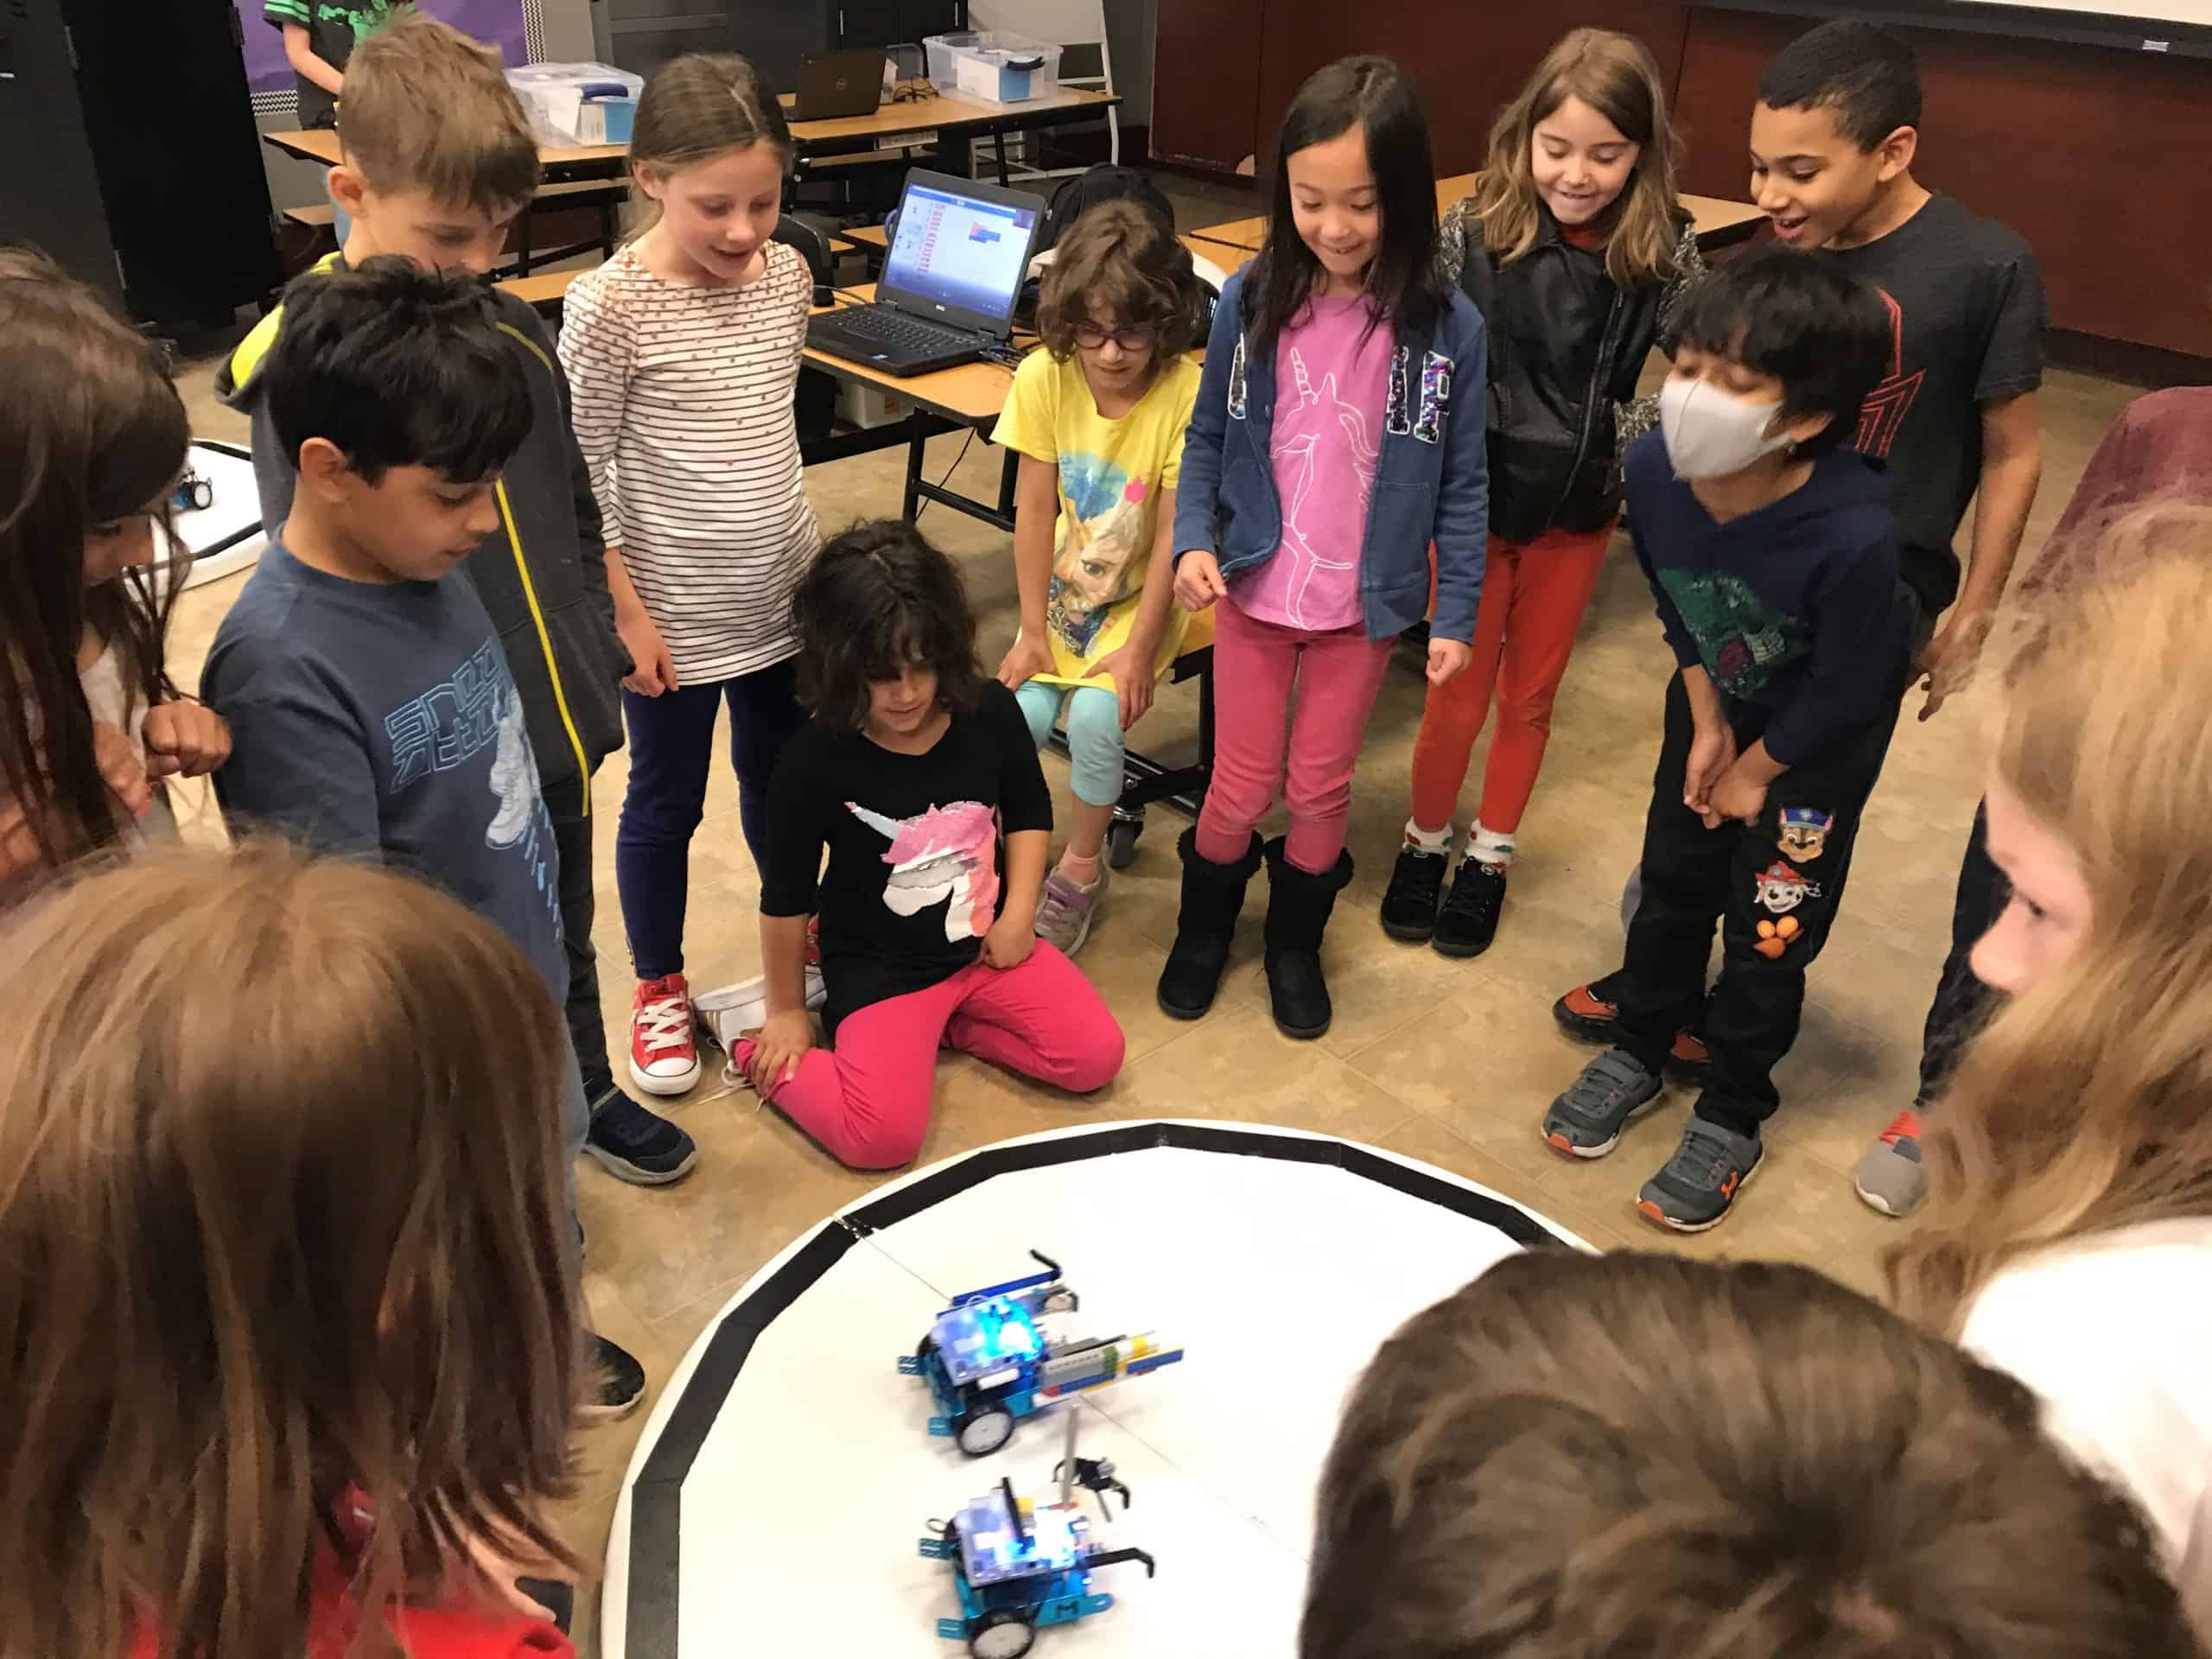 You are currently viewing LEGO Robot BattleBot Fun for ages 4 to 8, 9 to 12 | 9/17/22, 10 am to 12 noon | Upper Arlington